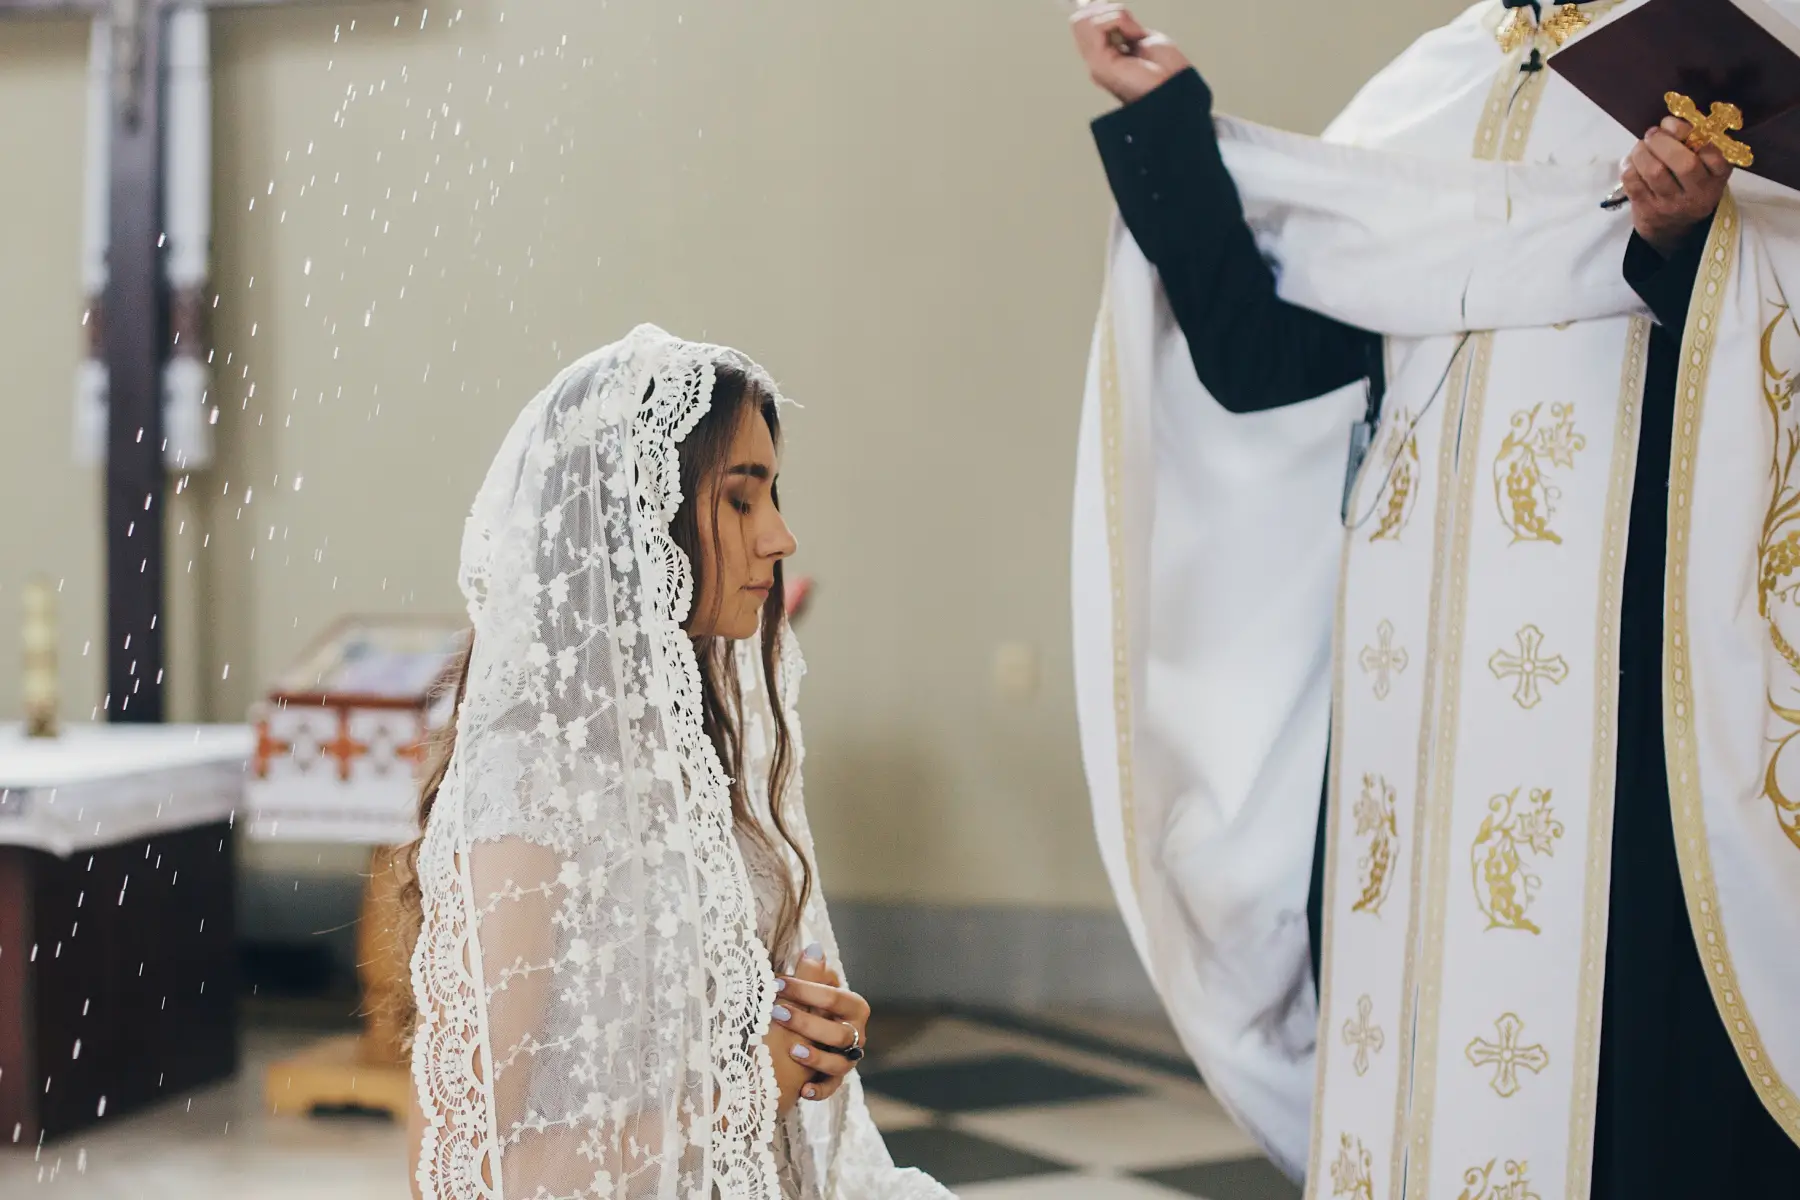 A Catholic priest performs a blessing on a bride with holy water